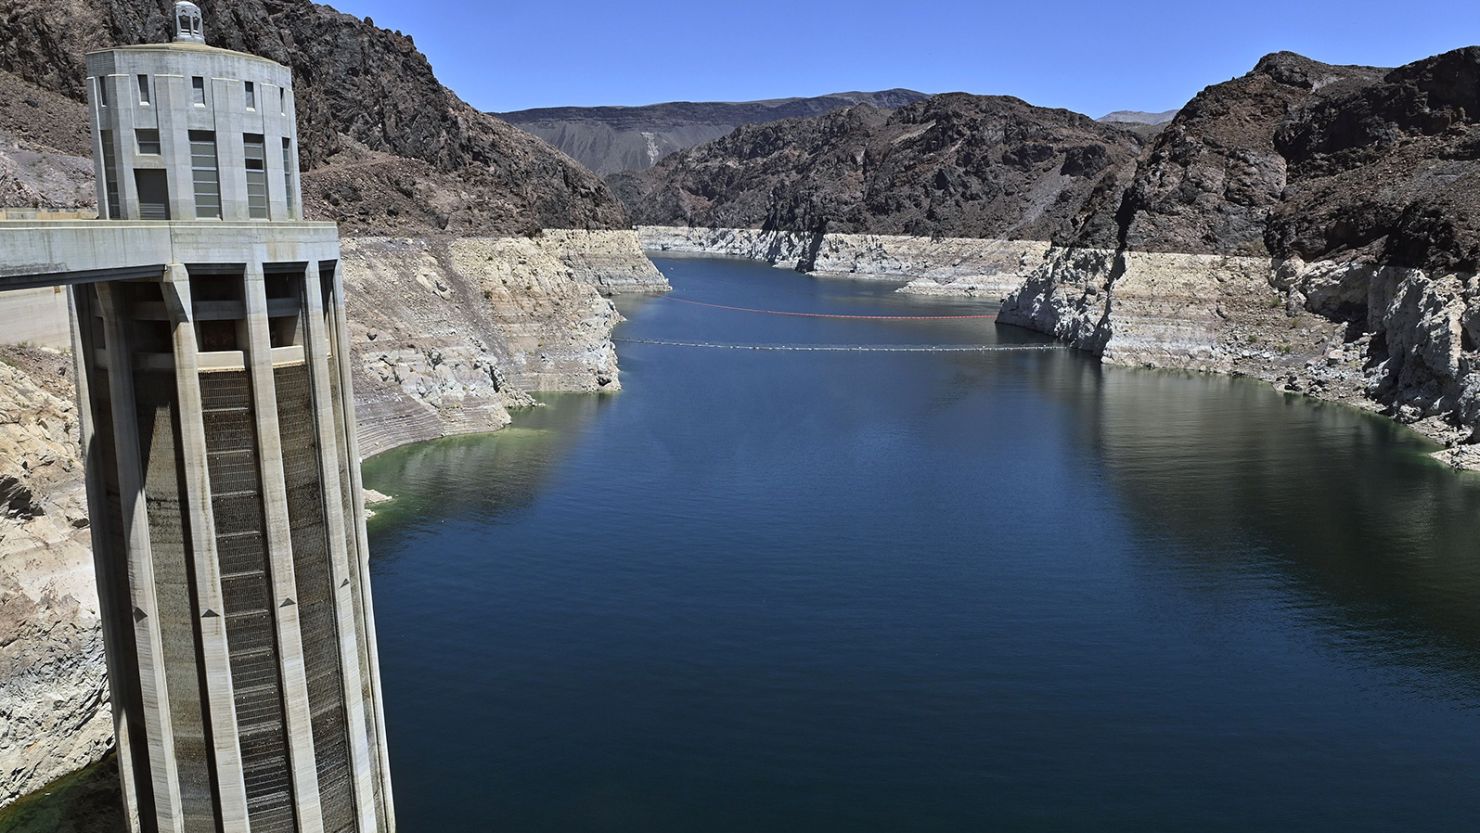 Lake Mead water level running well below predictions, could drop